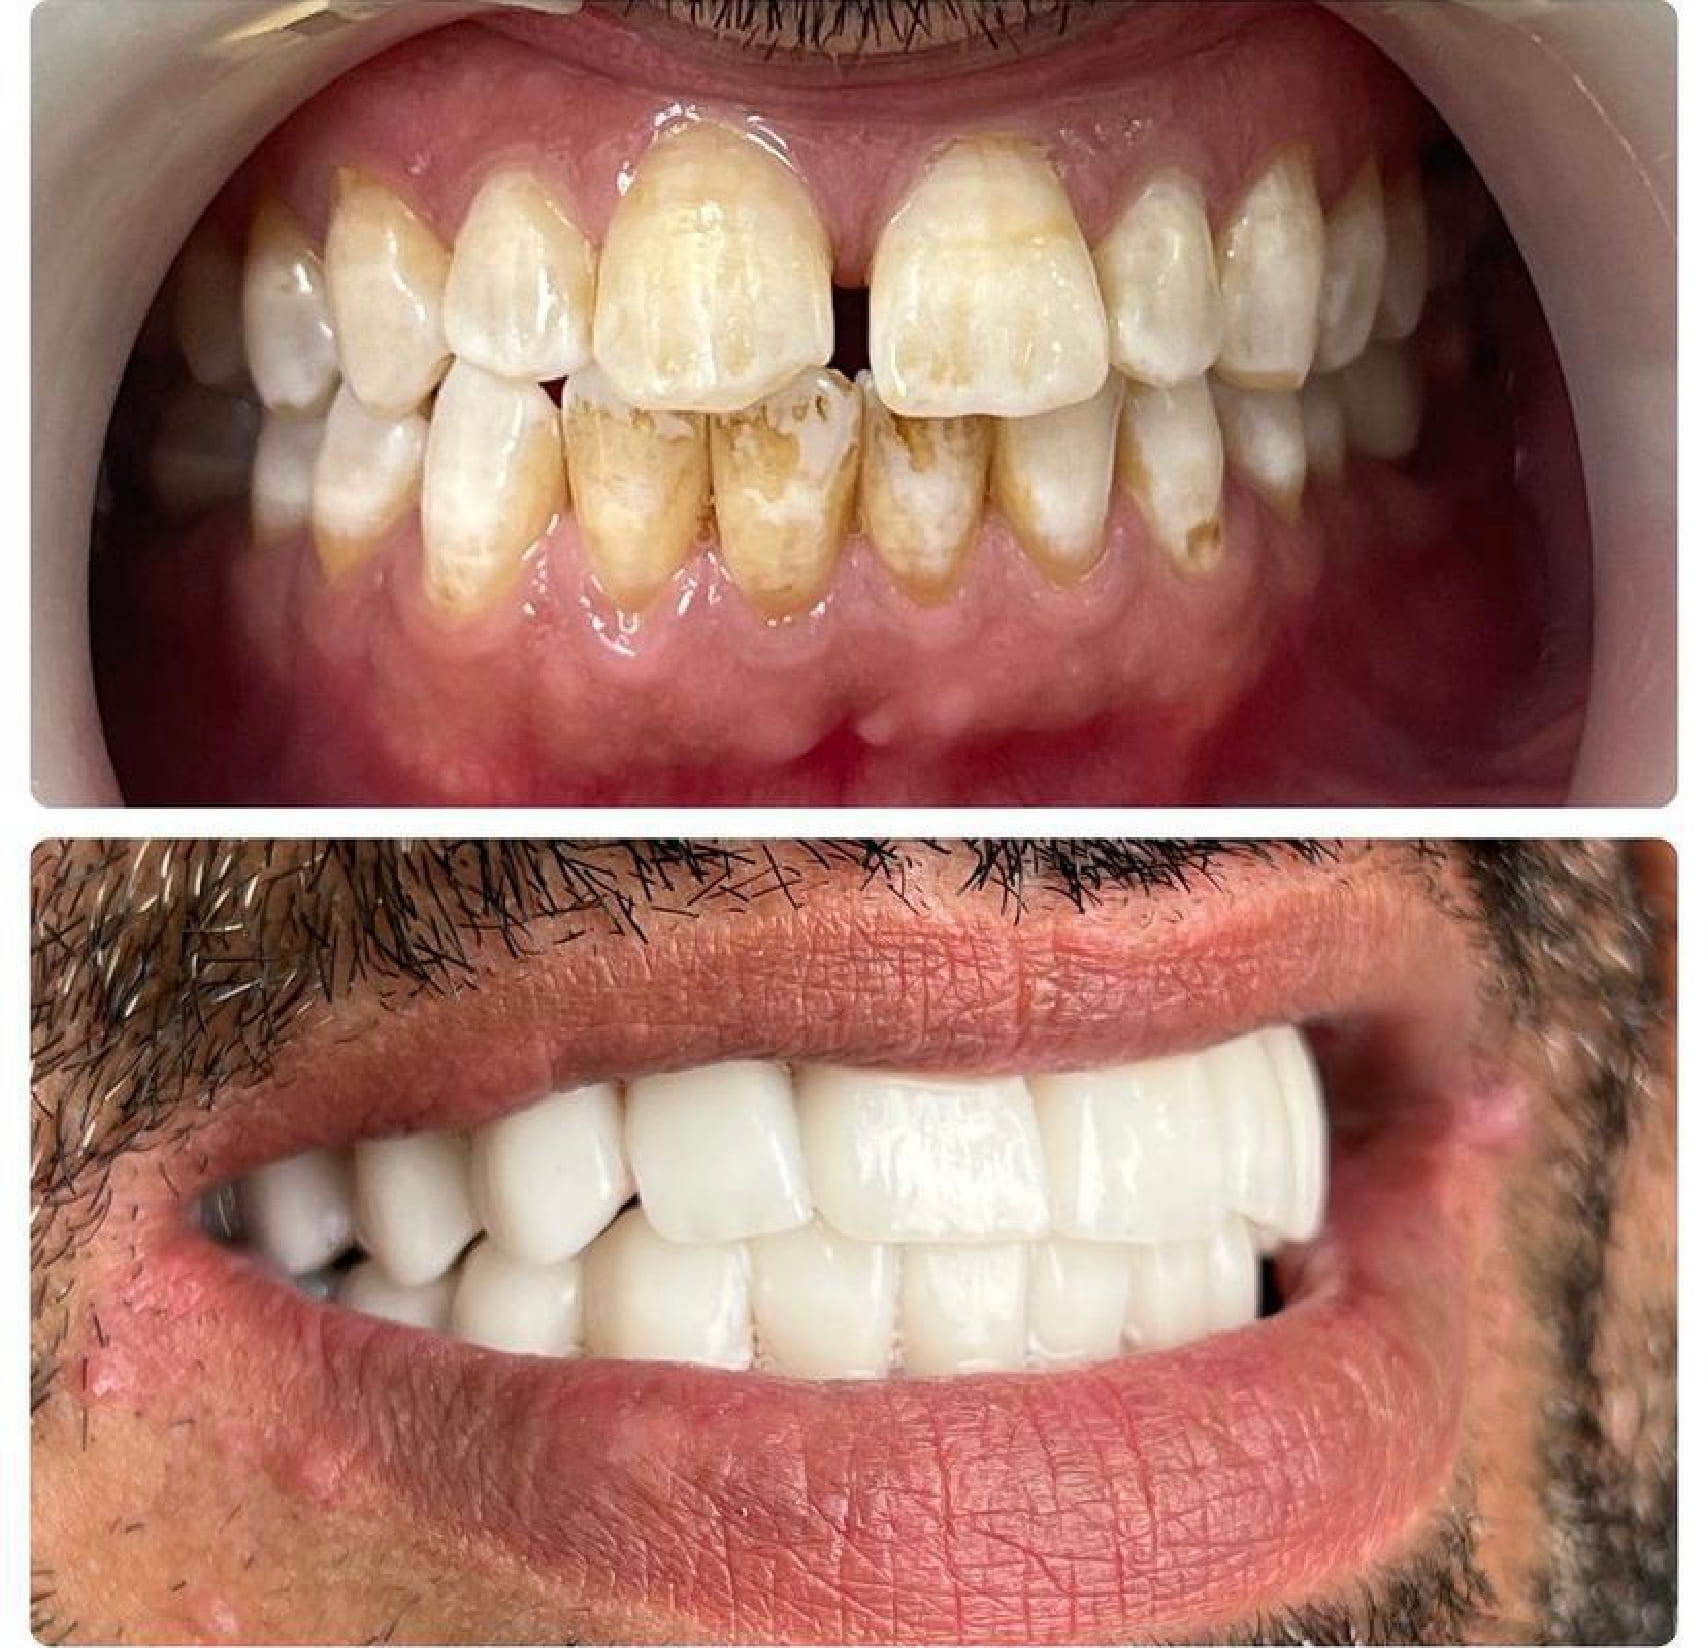 Cosmetic Dentistry - Before and After